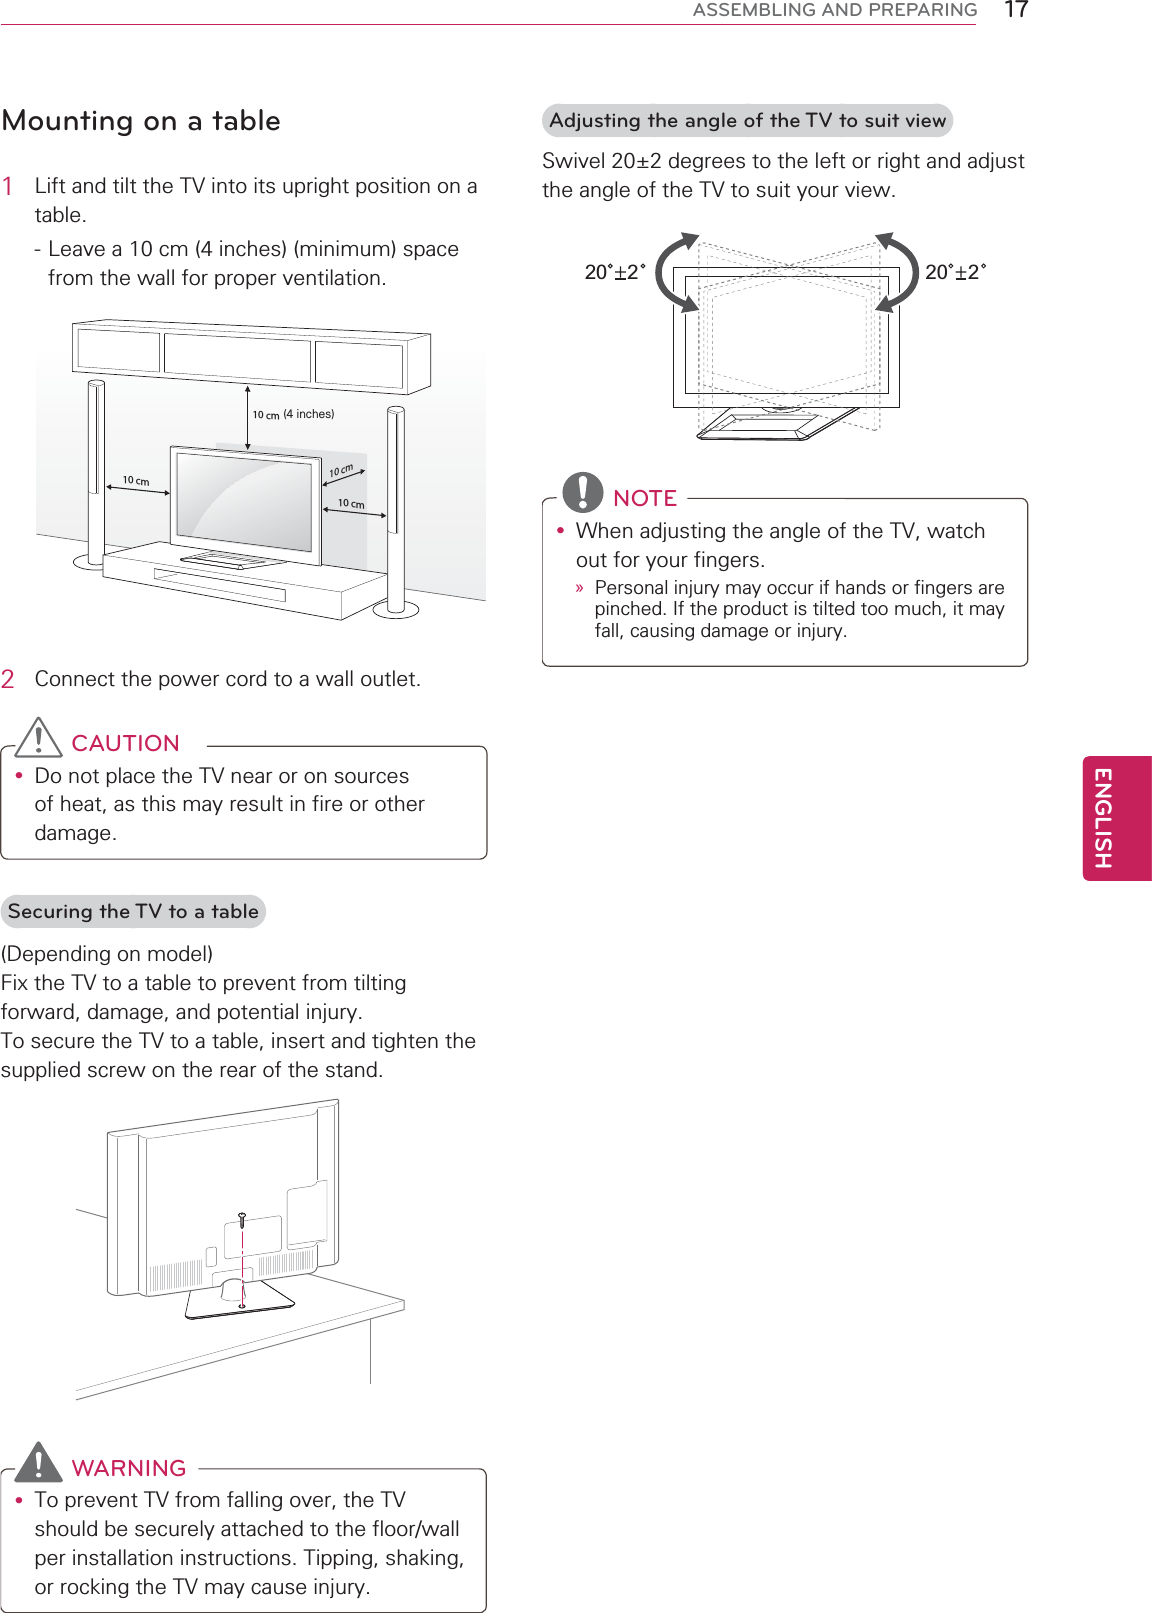 17ENGENGLISHASSEMBLING AND PREPARINGMounting on a table1  Lift and tilt the TV into its upright position on a table. - Leave a 10 cm (4 inches) (minimum) space from the wall for proper ventilation.10 cm10 cm10 cm10 cm(4 inches)2  Connect the power cord to a wall outlet. CAUTIONy Do not place the TV near or on sources of heat, as this may result in fire or other damage.Securing the TV to a table(Depending on model)Fix the TV to a table to prevent from tilting forward, damage, and potential injury.To secure the TV to a table, insert and tighten the supplied screw on the rear of the stand.  WARNINGy To prevent TV from falling over, the TV should be securely attached to the floor/wall per installation instructions. Tipping, shaking, or rocking the TV may cause injury.Adjusting the angle of the TV to suit viewSwivel 20±2 degrees to the left or right and adjust the angle of the TV to suit your view.20 220 2   NOTEy When adjusting the angle of the TV, watch out for your fingers.» Personal injury may occur if hands or fingers are pinched. If the product is tilted too much, it may fall, causing damage or injury.